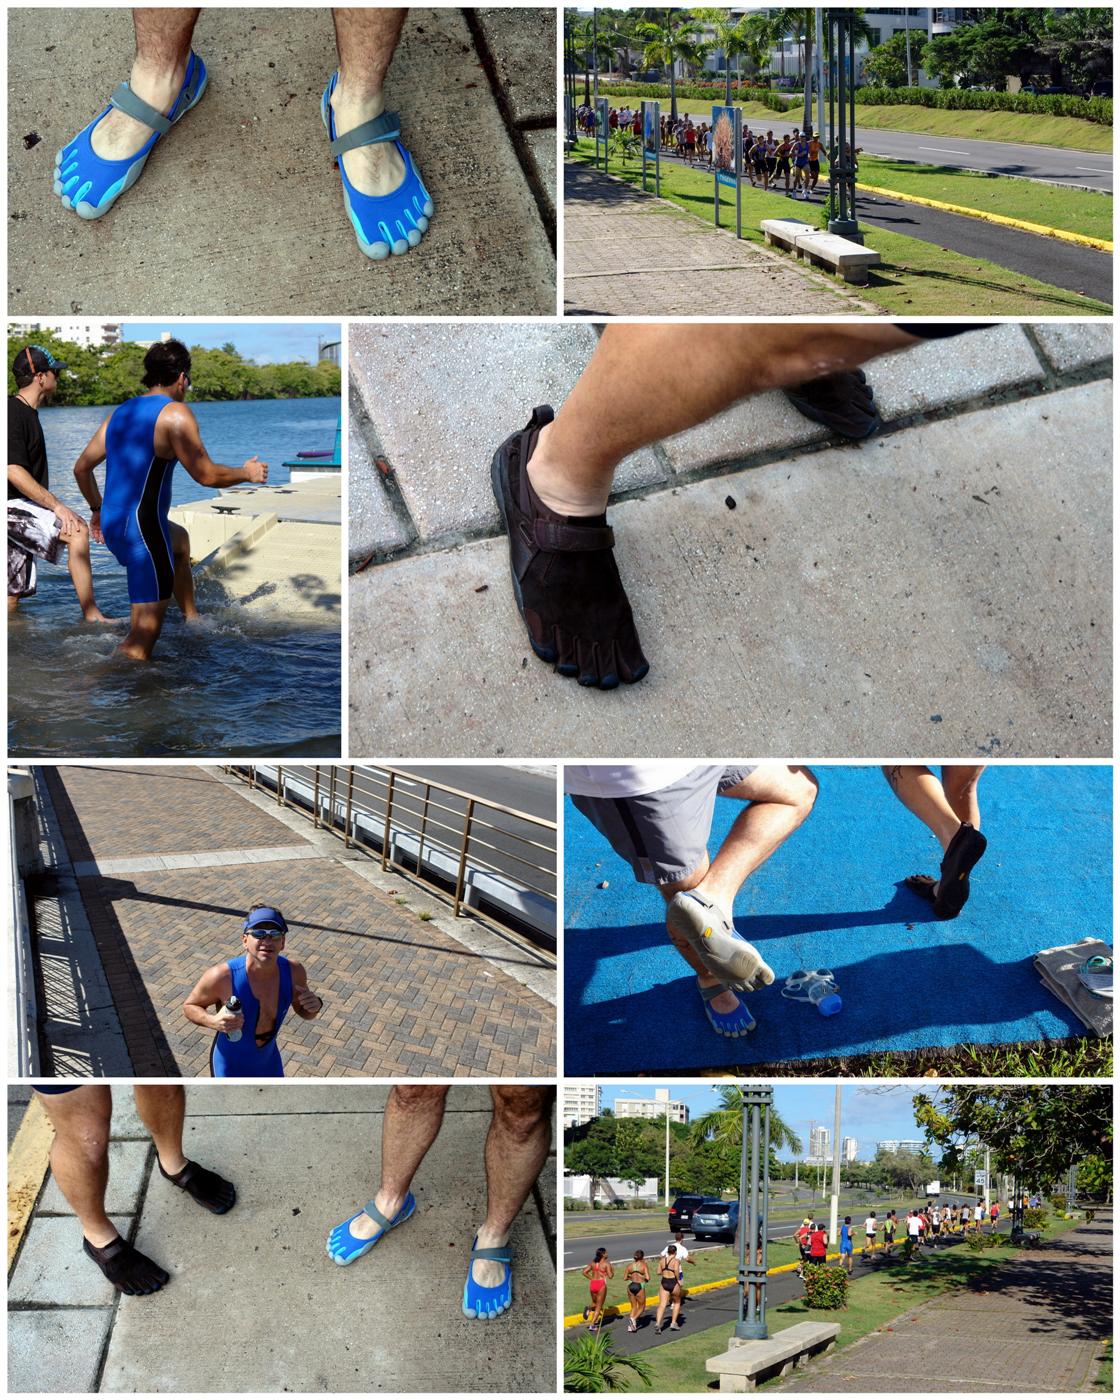 A photo montage from Luis Manuel Cid (Inset in blue wetsuit, KSO Treks) and Luis Armando Santiago (Sprints) at an Aquathlon.  Click the image for a larger version!